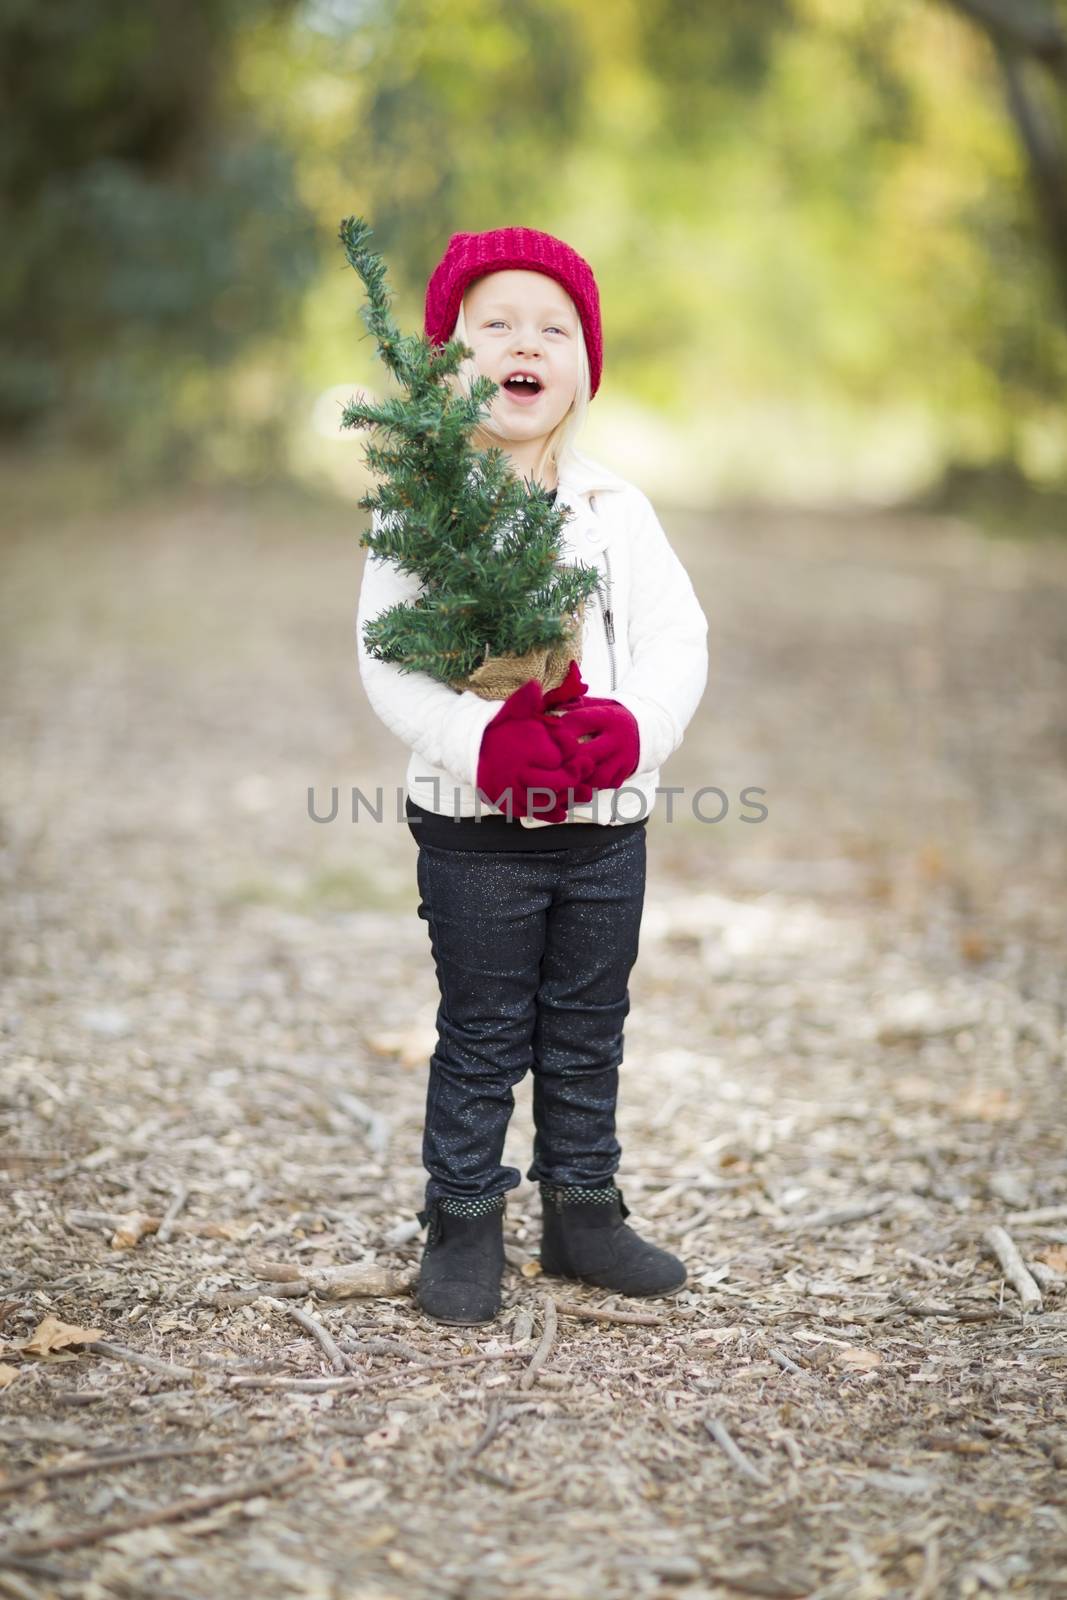 Baby Girl In Red Mittens and Cap Holding Small Christmas Tree by Feverpitched